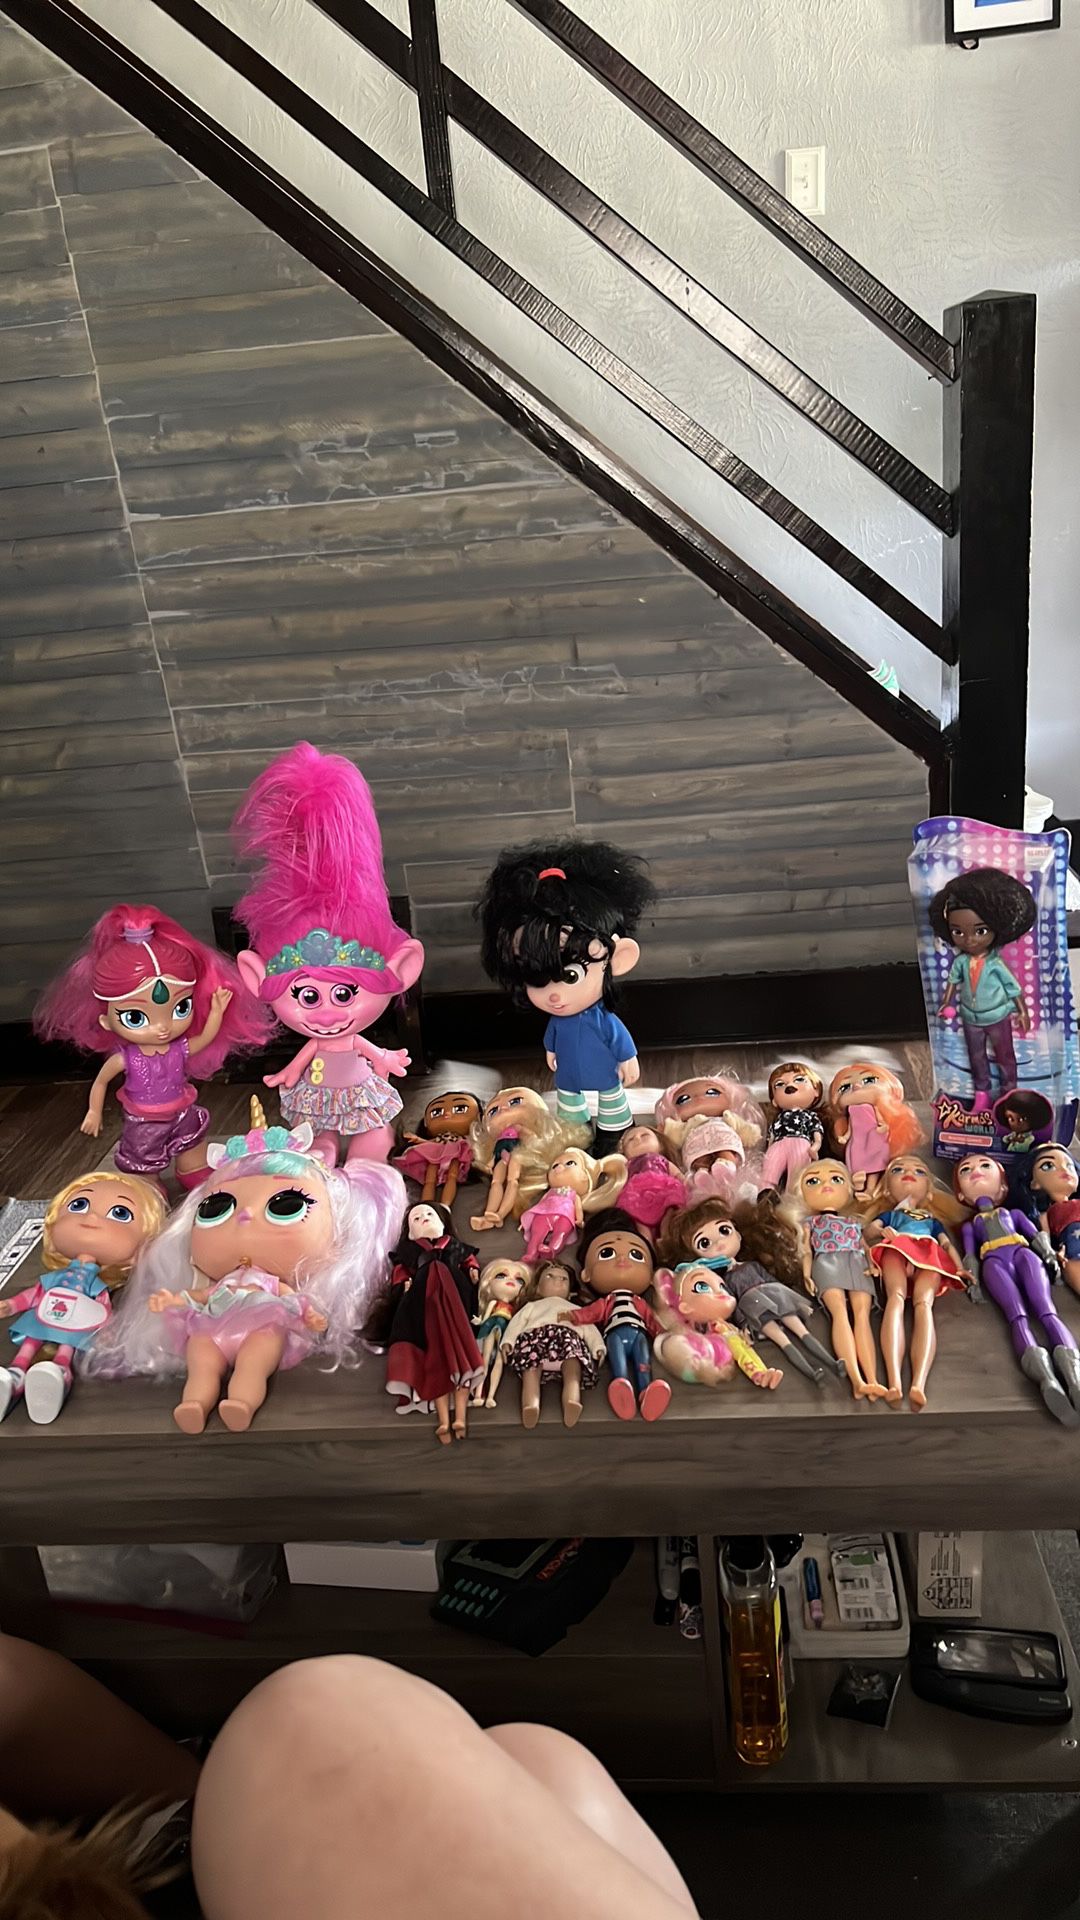 Assorted Variety of Dolls! Bratz, SuperHeros, Troll, Lol and so much more